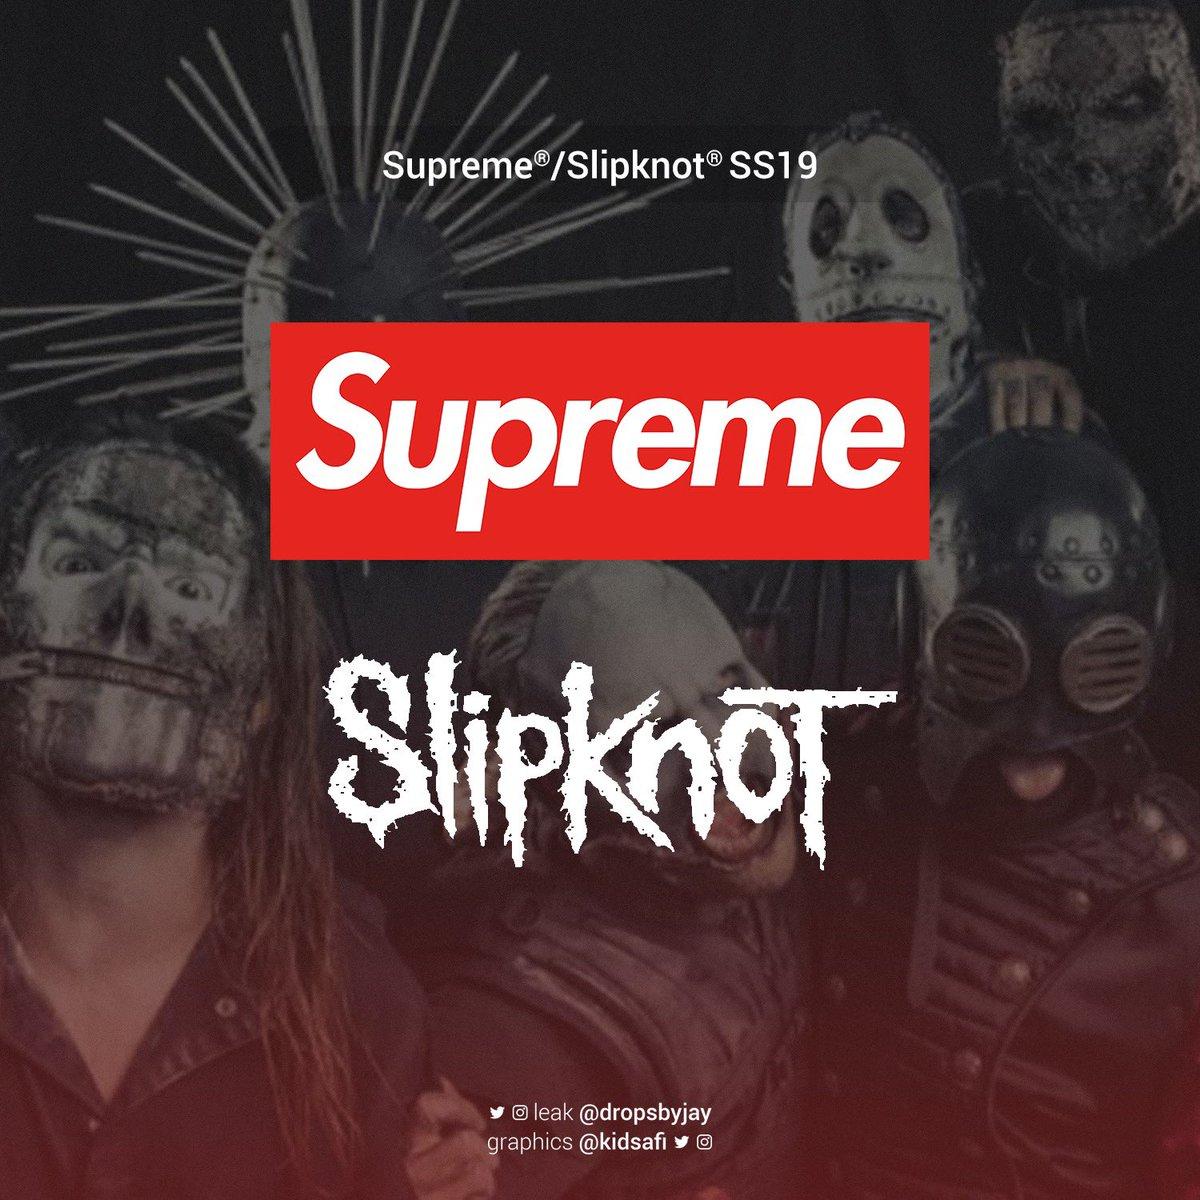 Slipknot x Supreme Clothing Line in the Works?